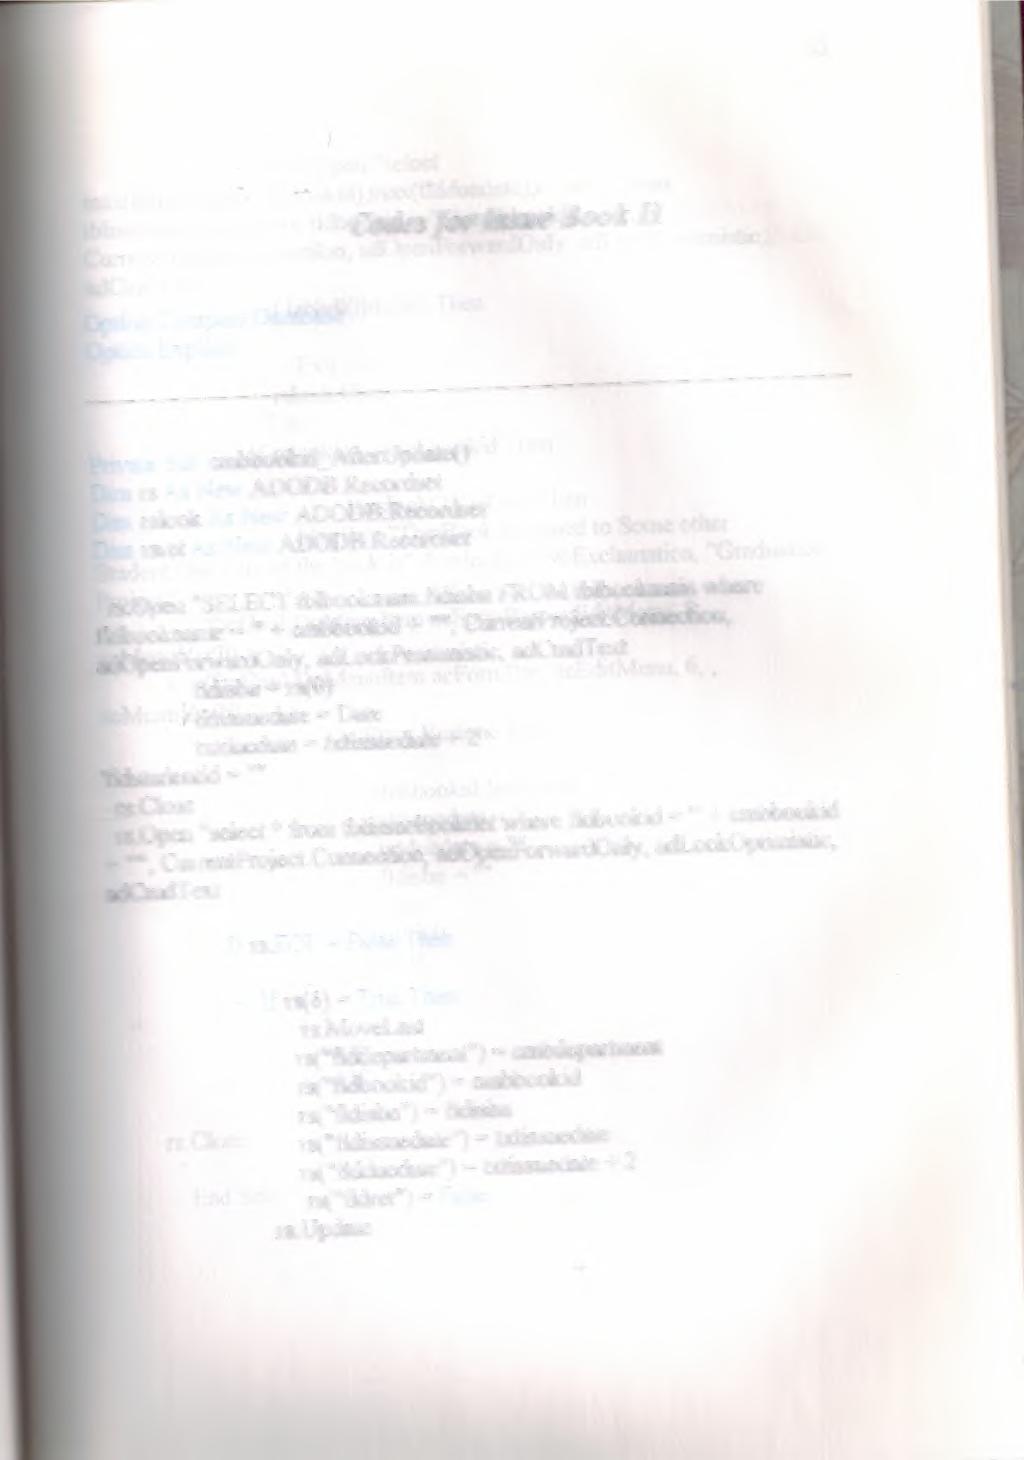 33 Codes for Issue Book II Option Compare Database Option Explicit Private Sub cmbbookid _AfterUpdateO Dim rs As New ADODB.